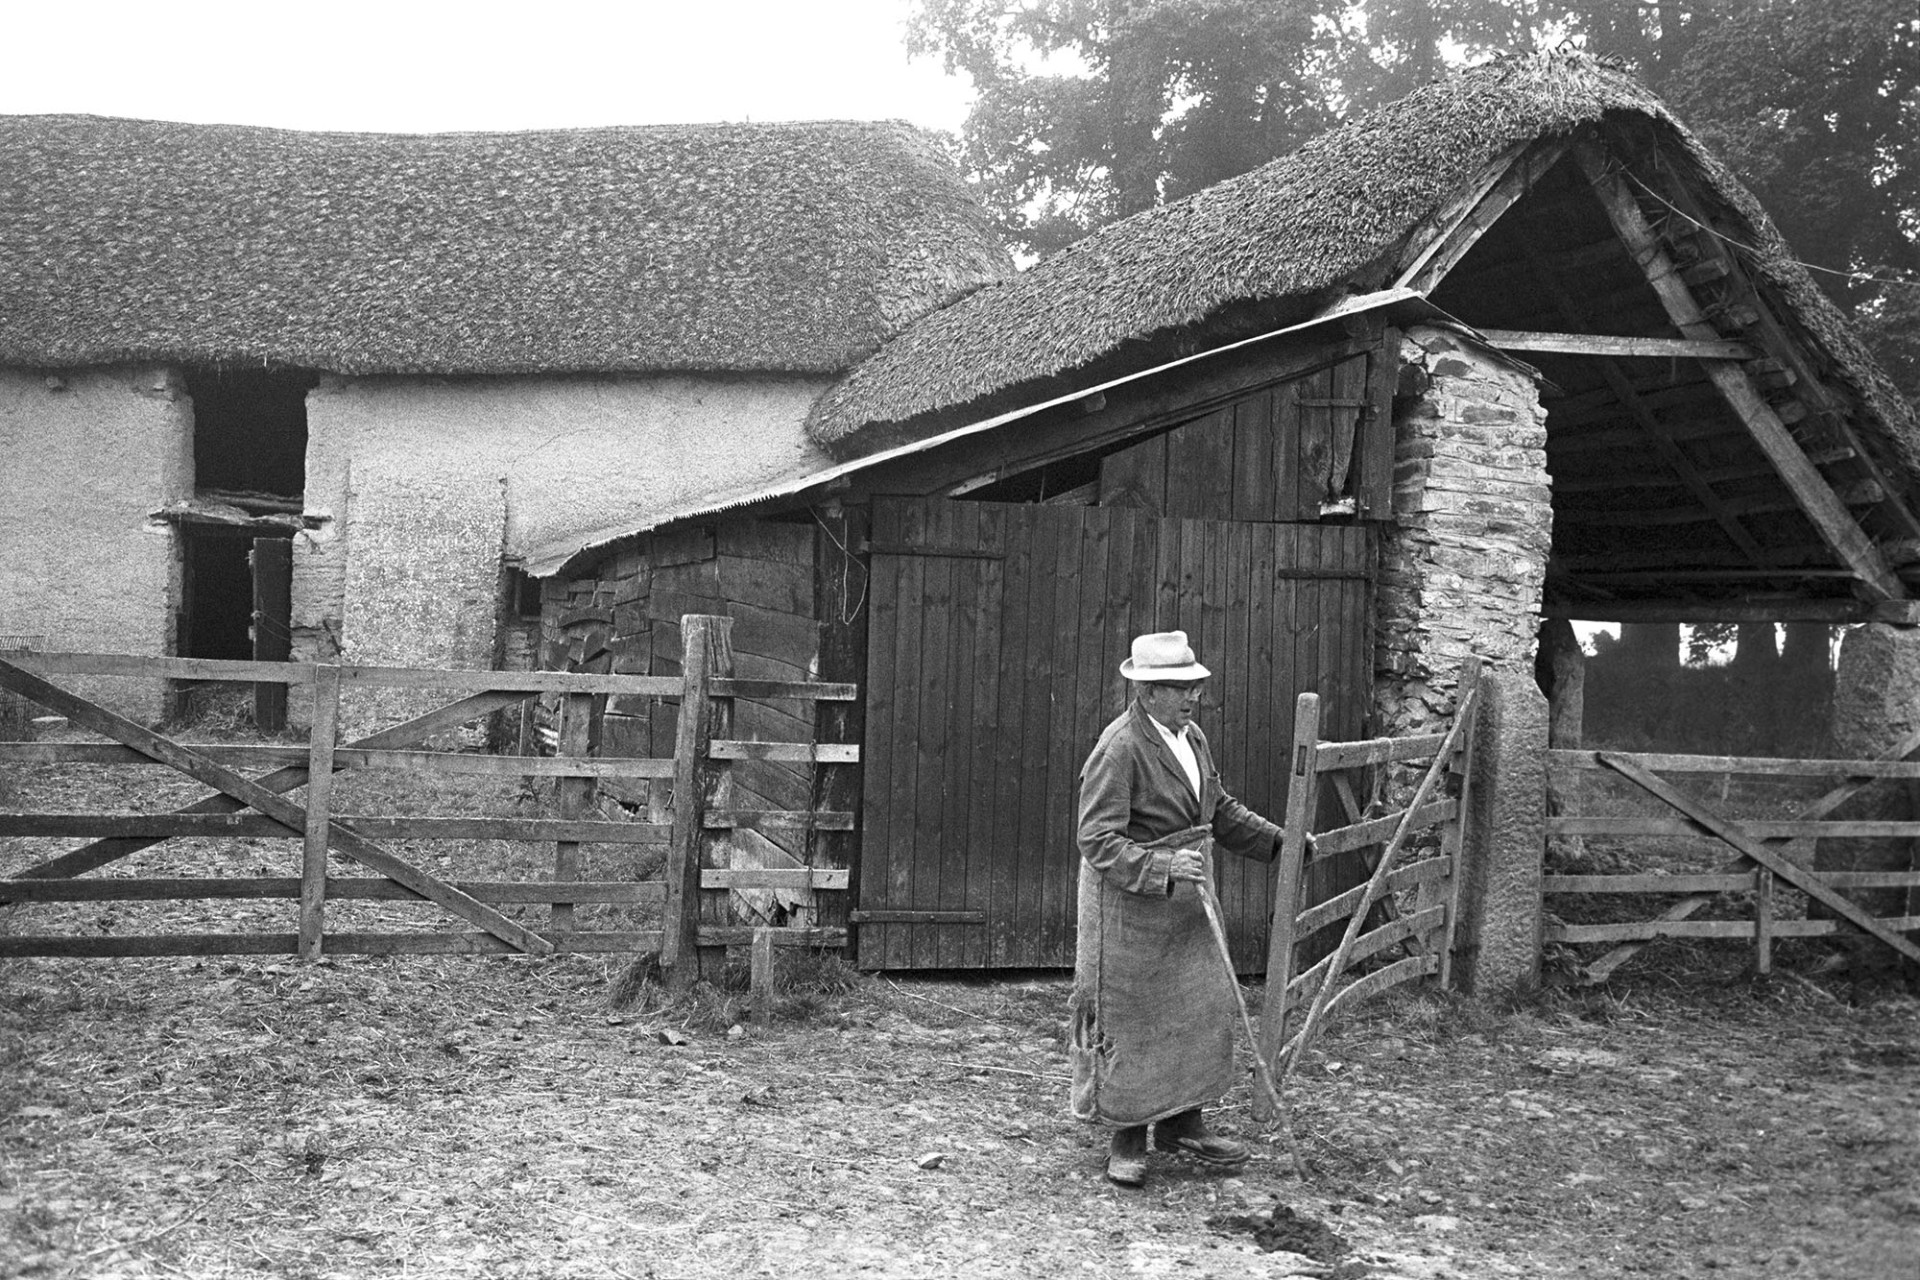 Thatched barns, farmer in sack apron closing gate.
[Thomas Ellacott, wearing a hat and a sack apron, closing a gate in front of a thatched barn at Westacott, Riddlecombe.]